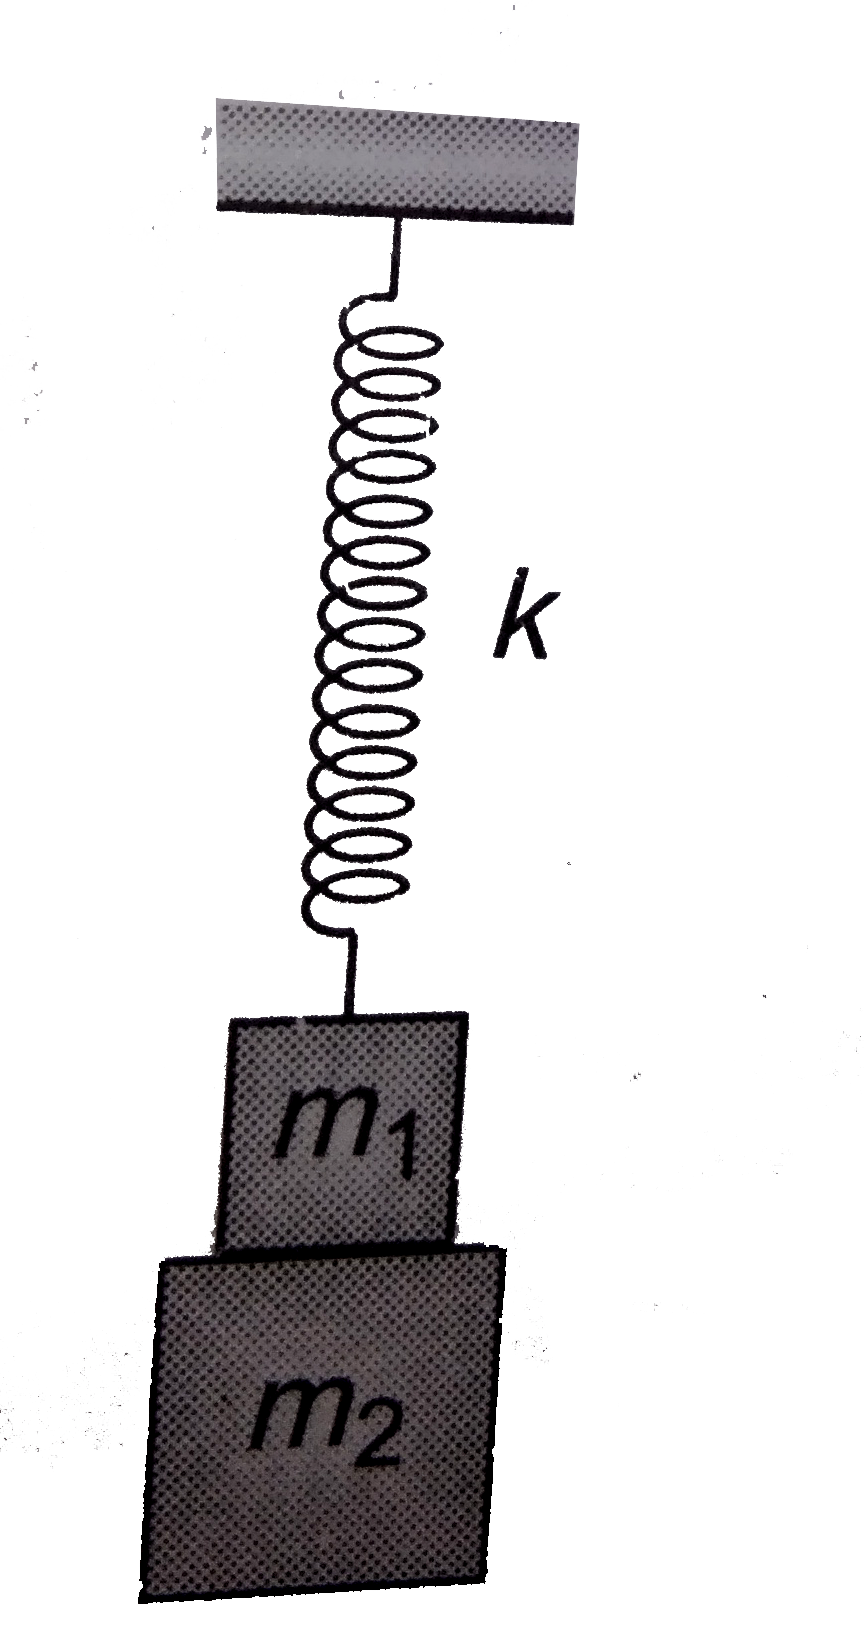 Two blocks of masses m1 and m2 are attached to the lower end of a light vertical spring of force constant k. The upper end of the spring is fixed. When the system is in equilibrium, the lower block (m2) drops off. The other block (m1) will